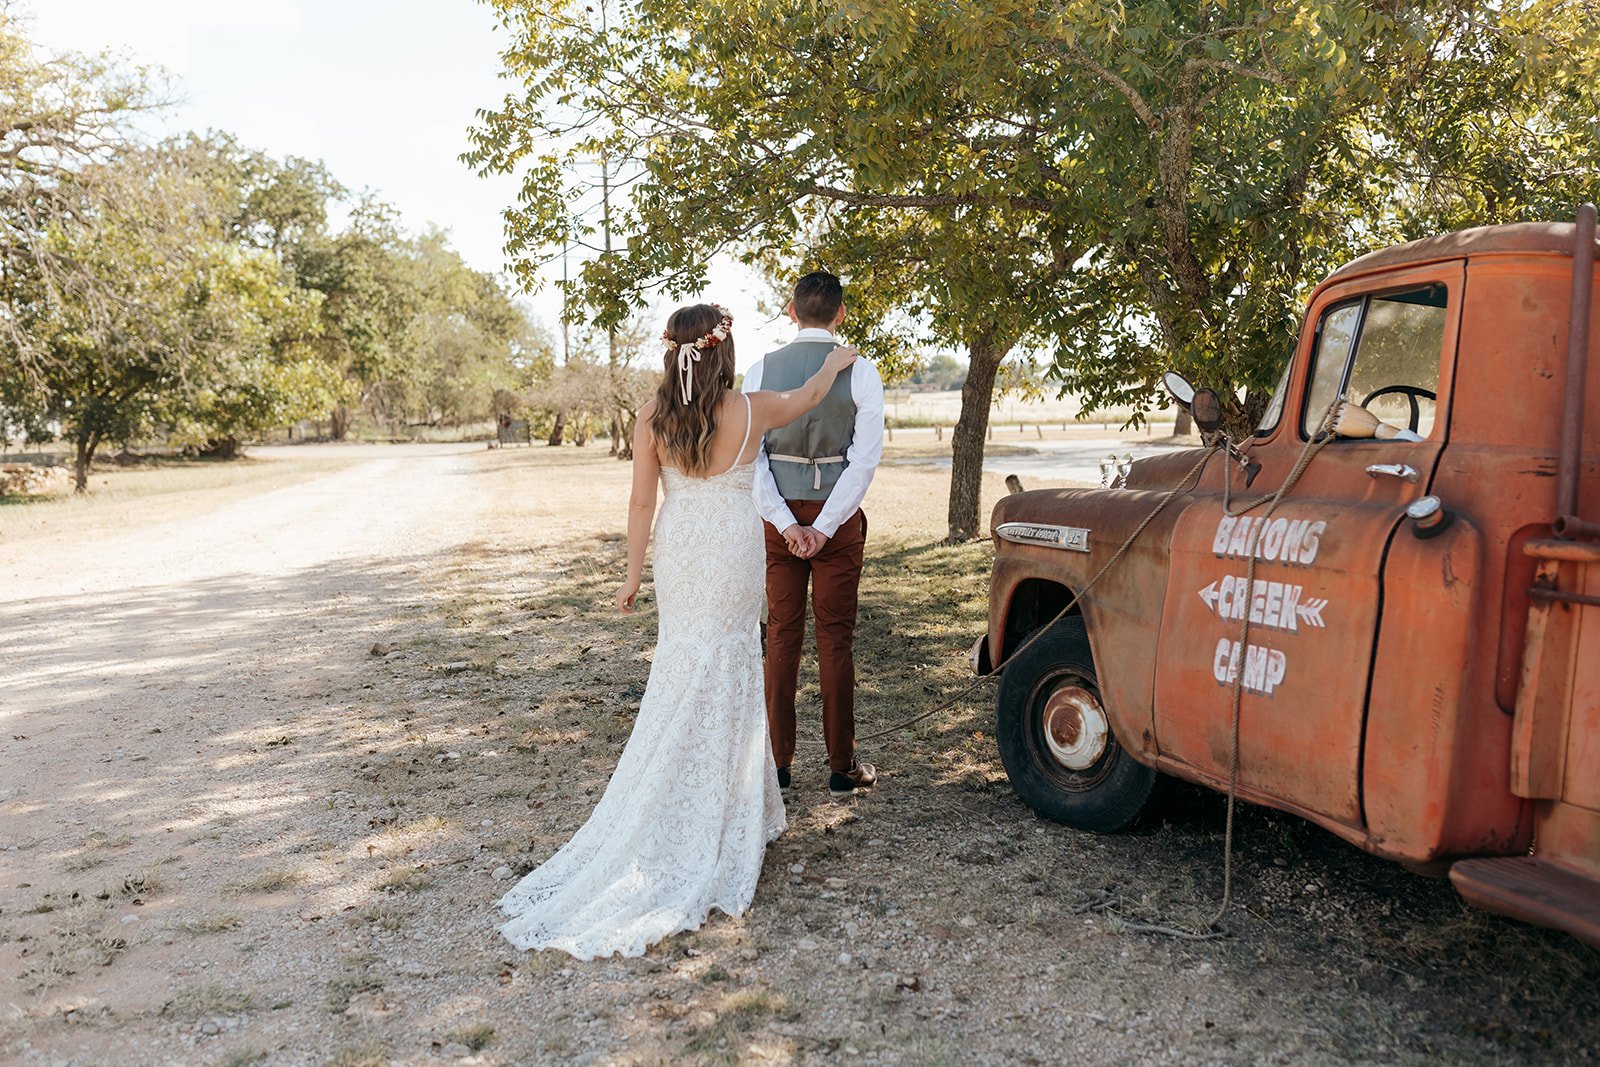 James and Leah's first look near the Baron's Creek Camp vintage red pickup truck